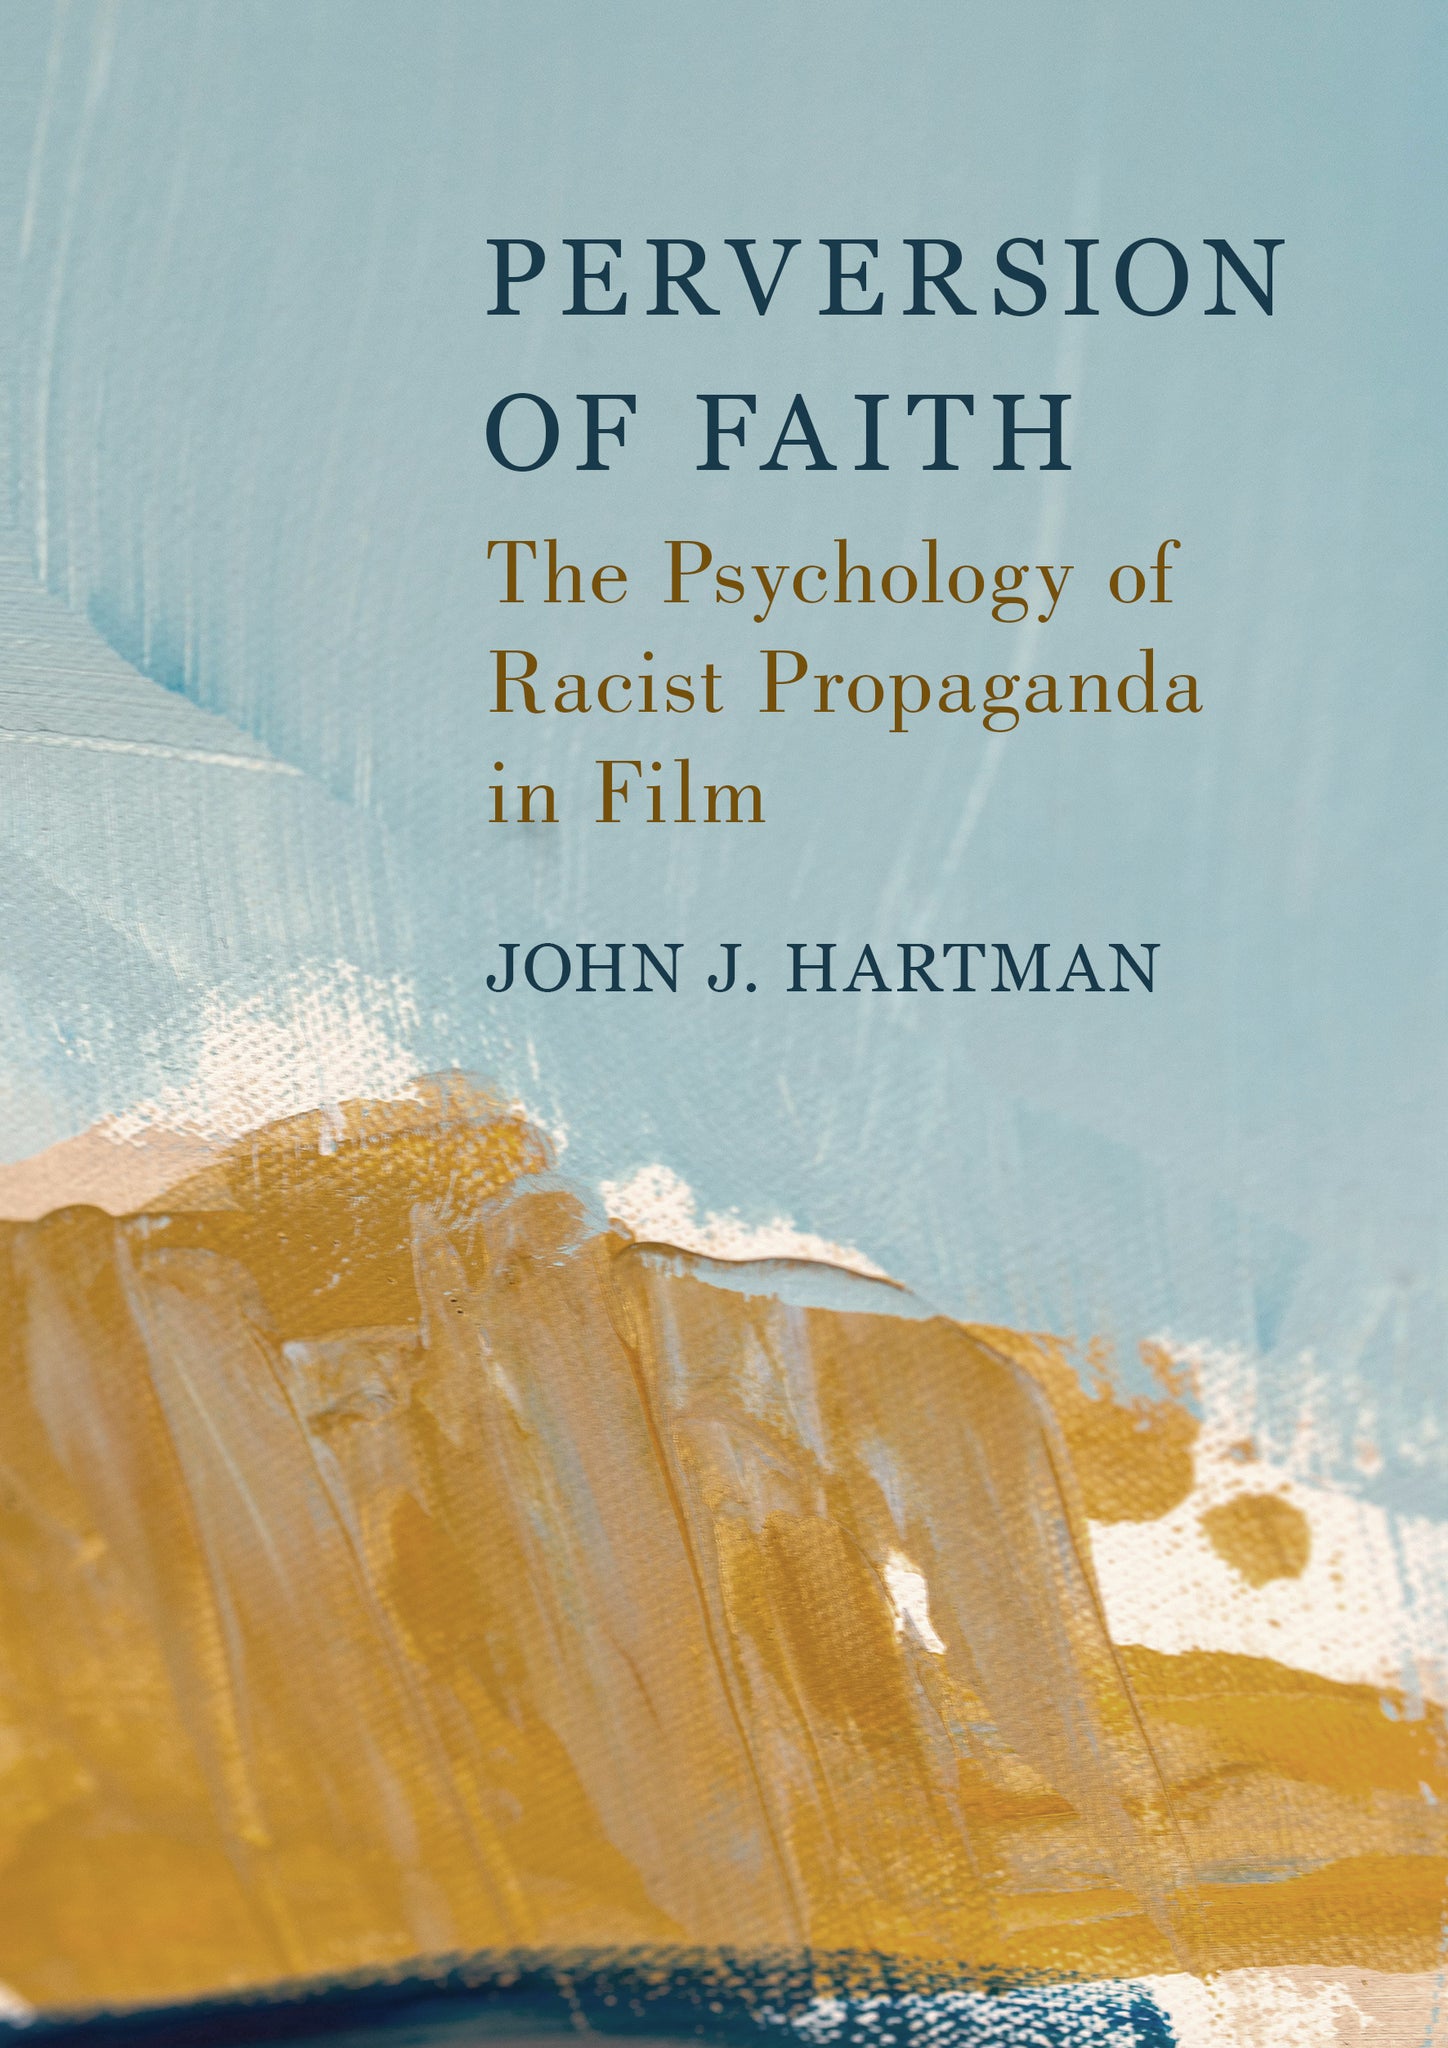 Perversion of Faith: The Psychology of Racist Propaganda in Film